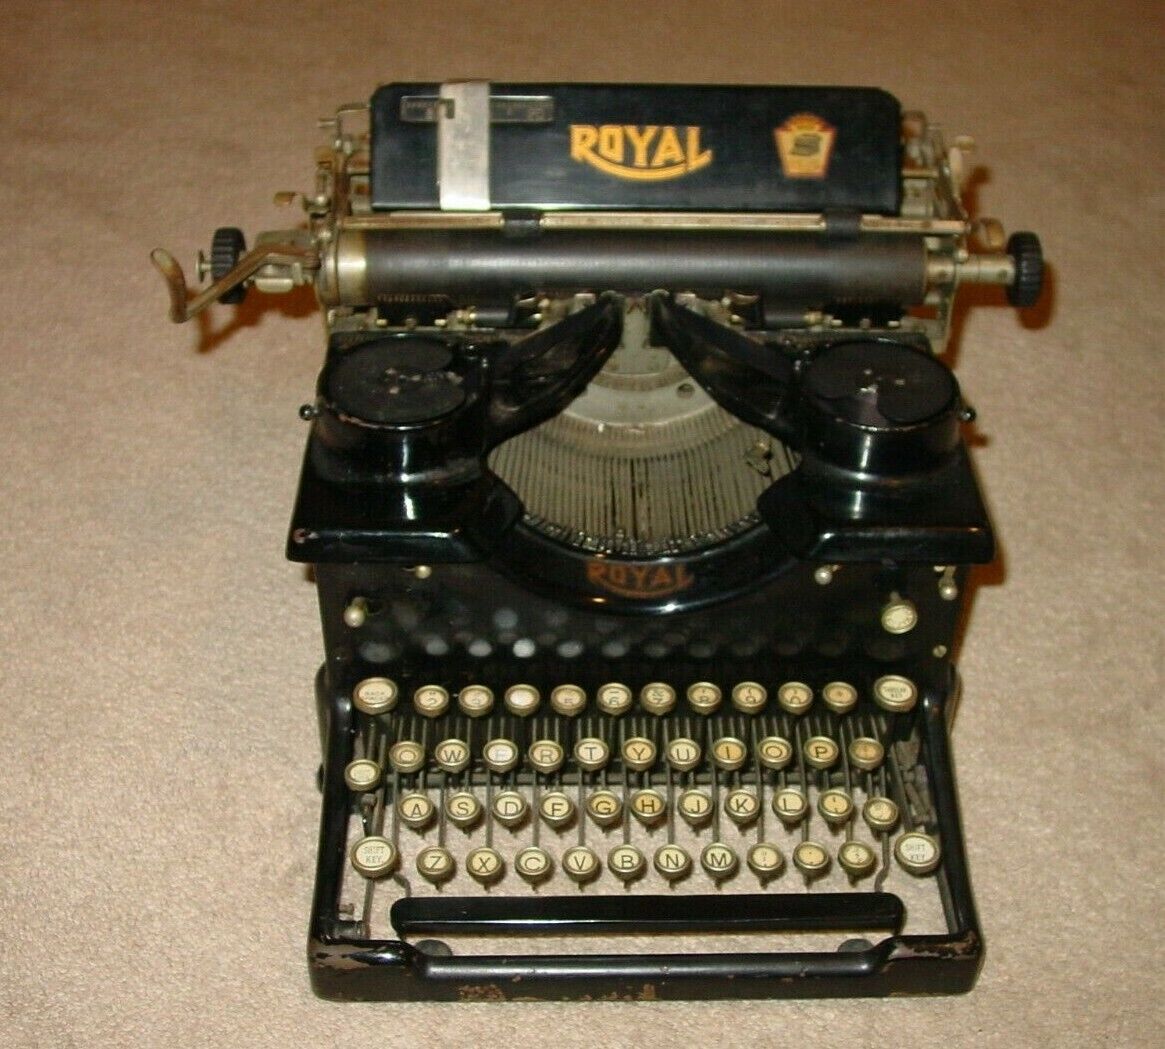 ANTIQUE 1915 ROYAL NO 10 TYPEWRITER 2ND VARIATION DOUBLE GLASS SIDES REGAL 